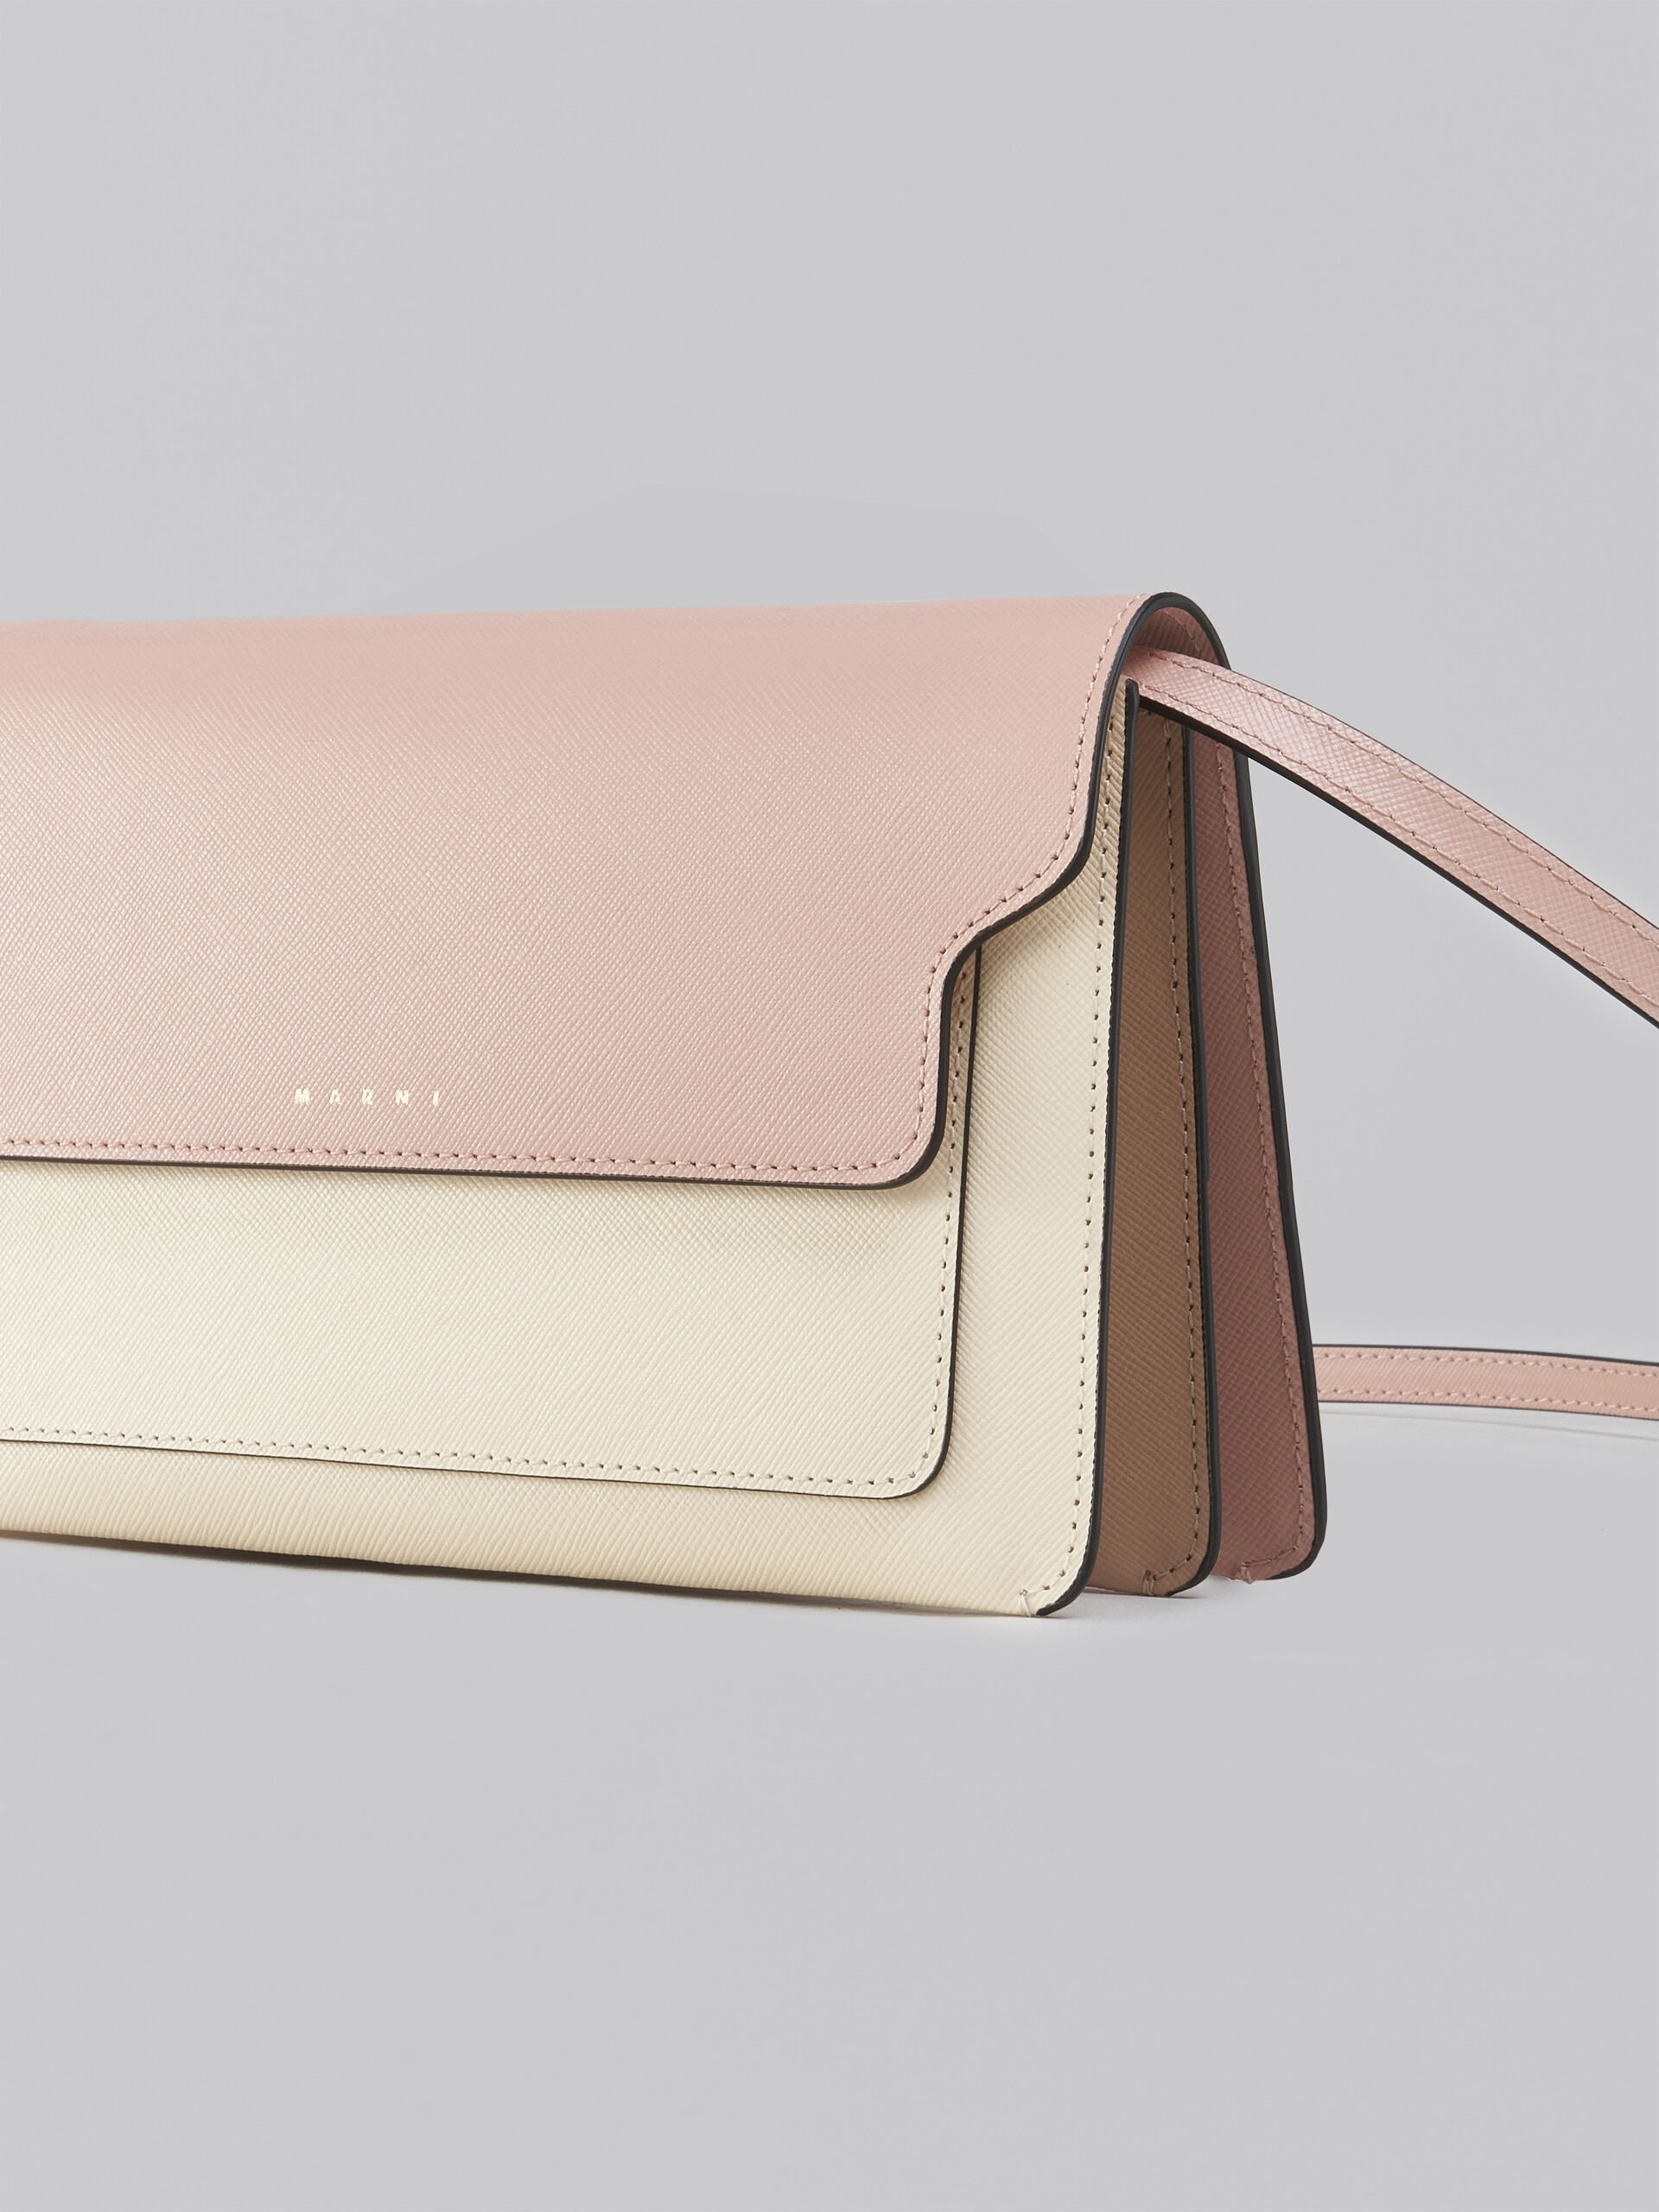 Trunk Clutch in pink white and beige saffiano leather - Pochette - Image 5